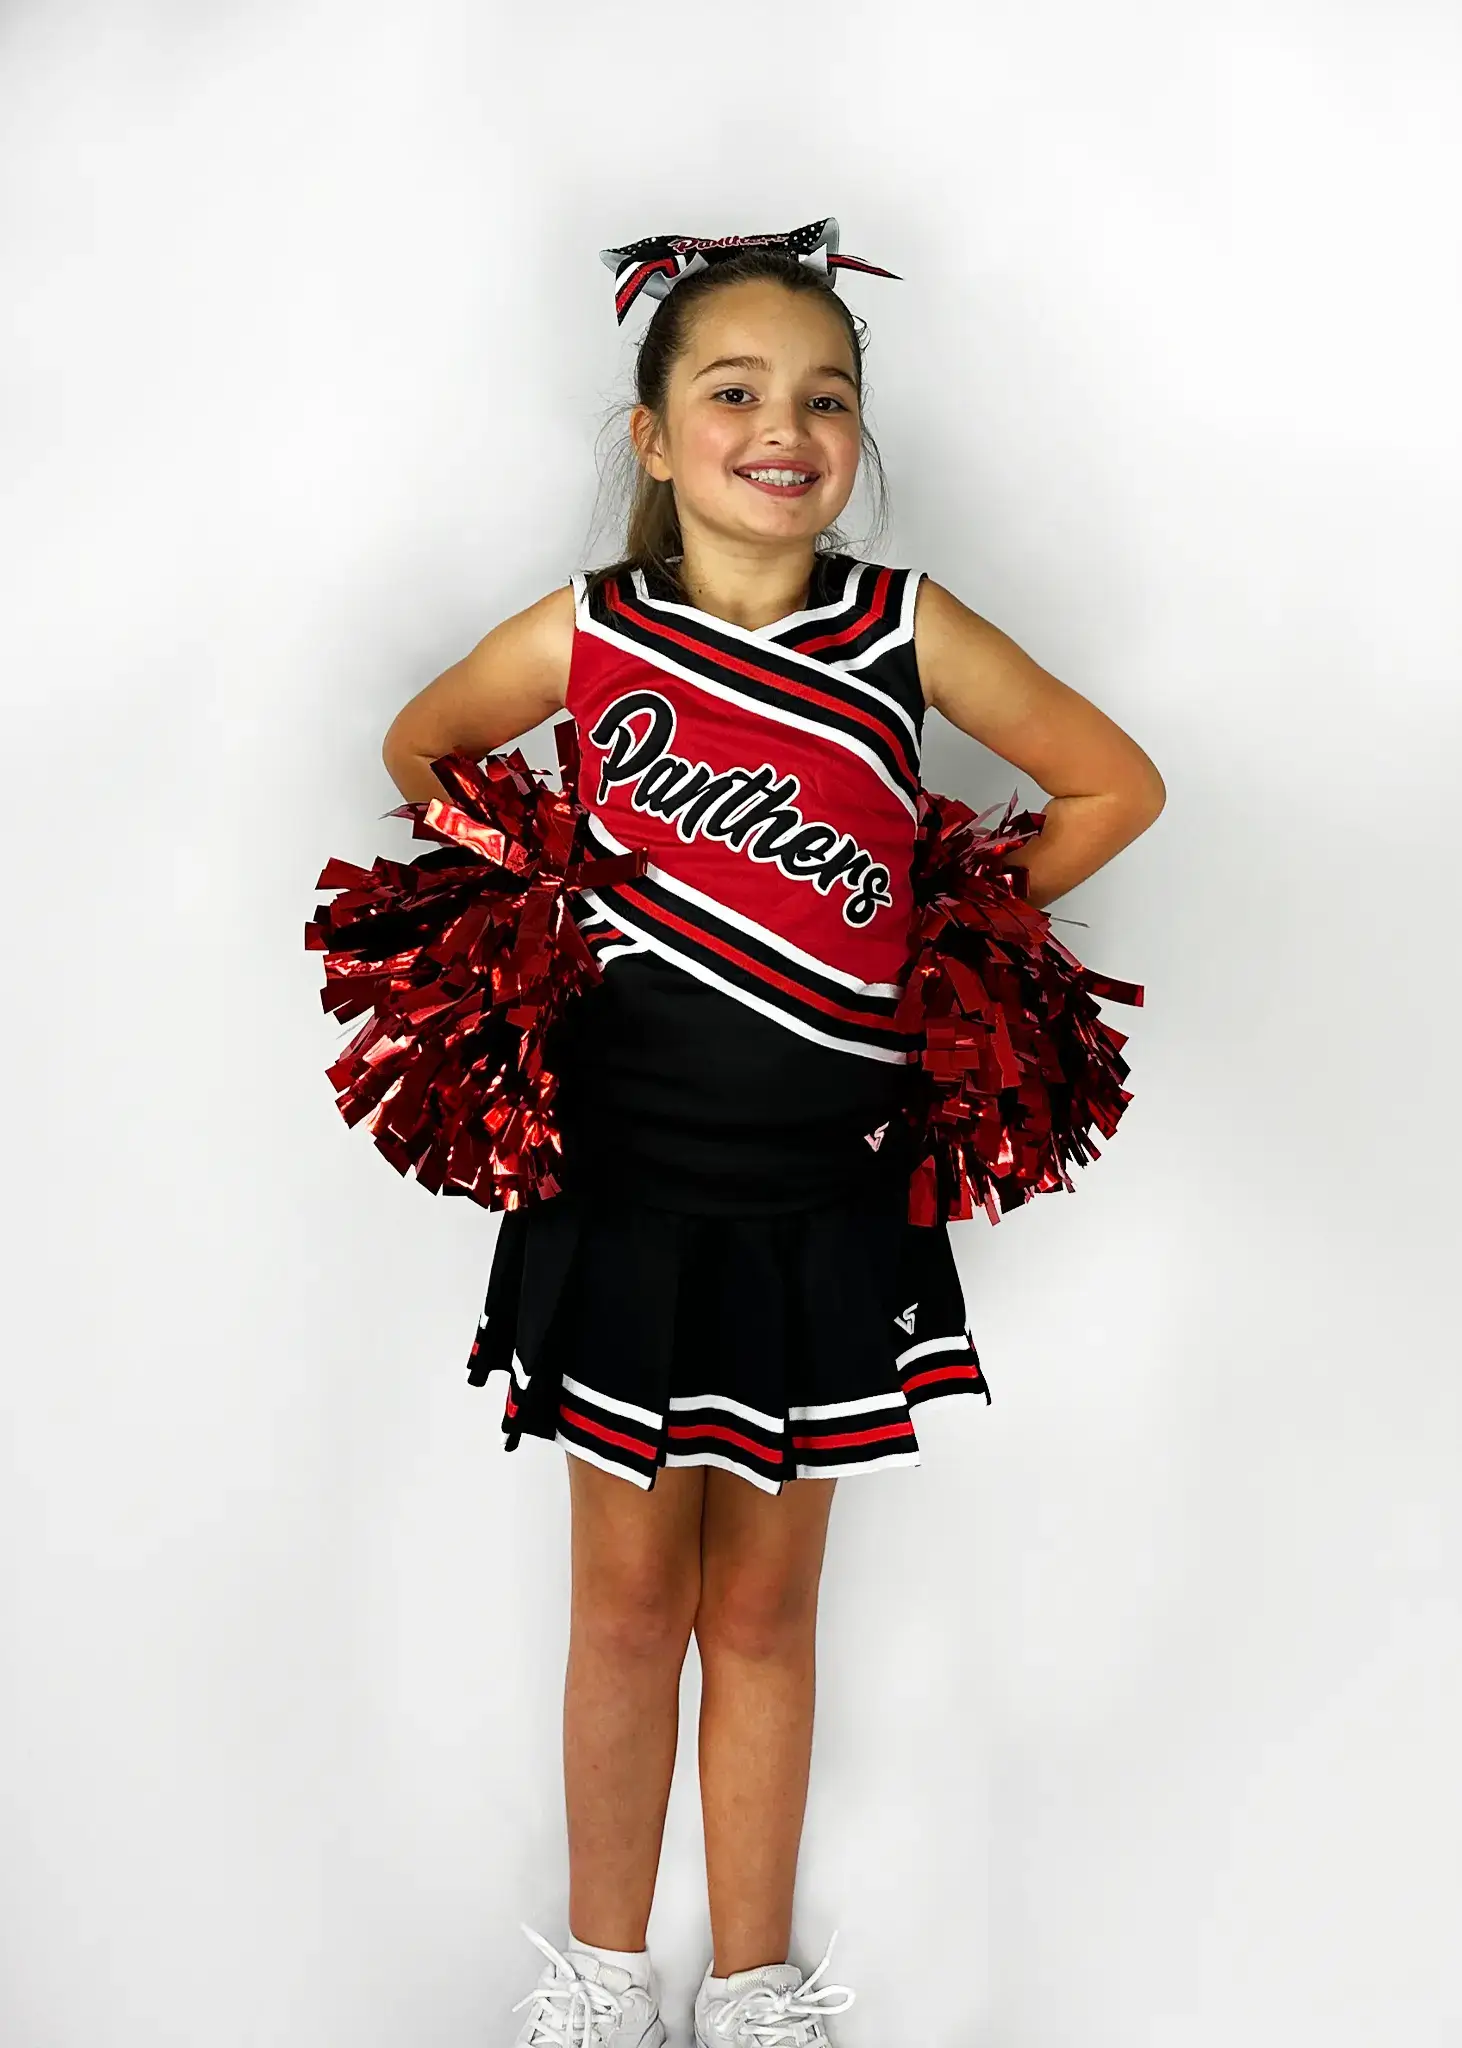 Panthers Cheer Uniform